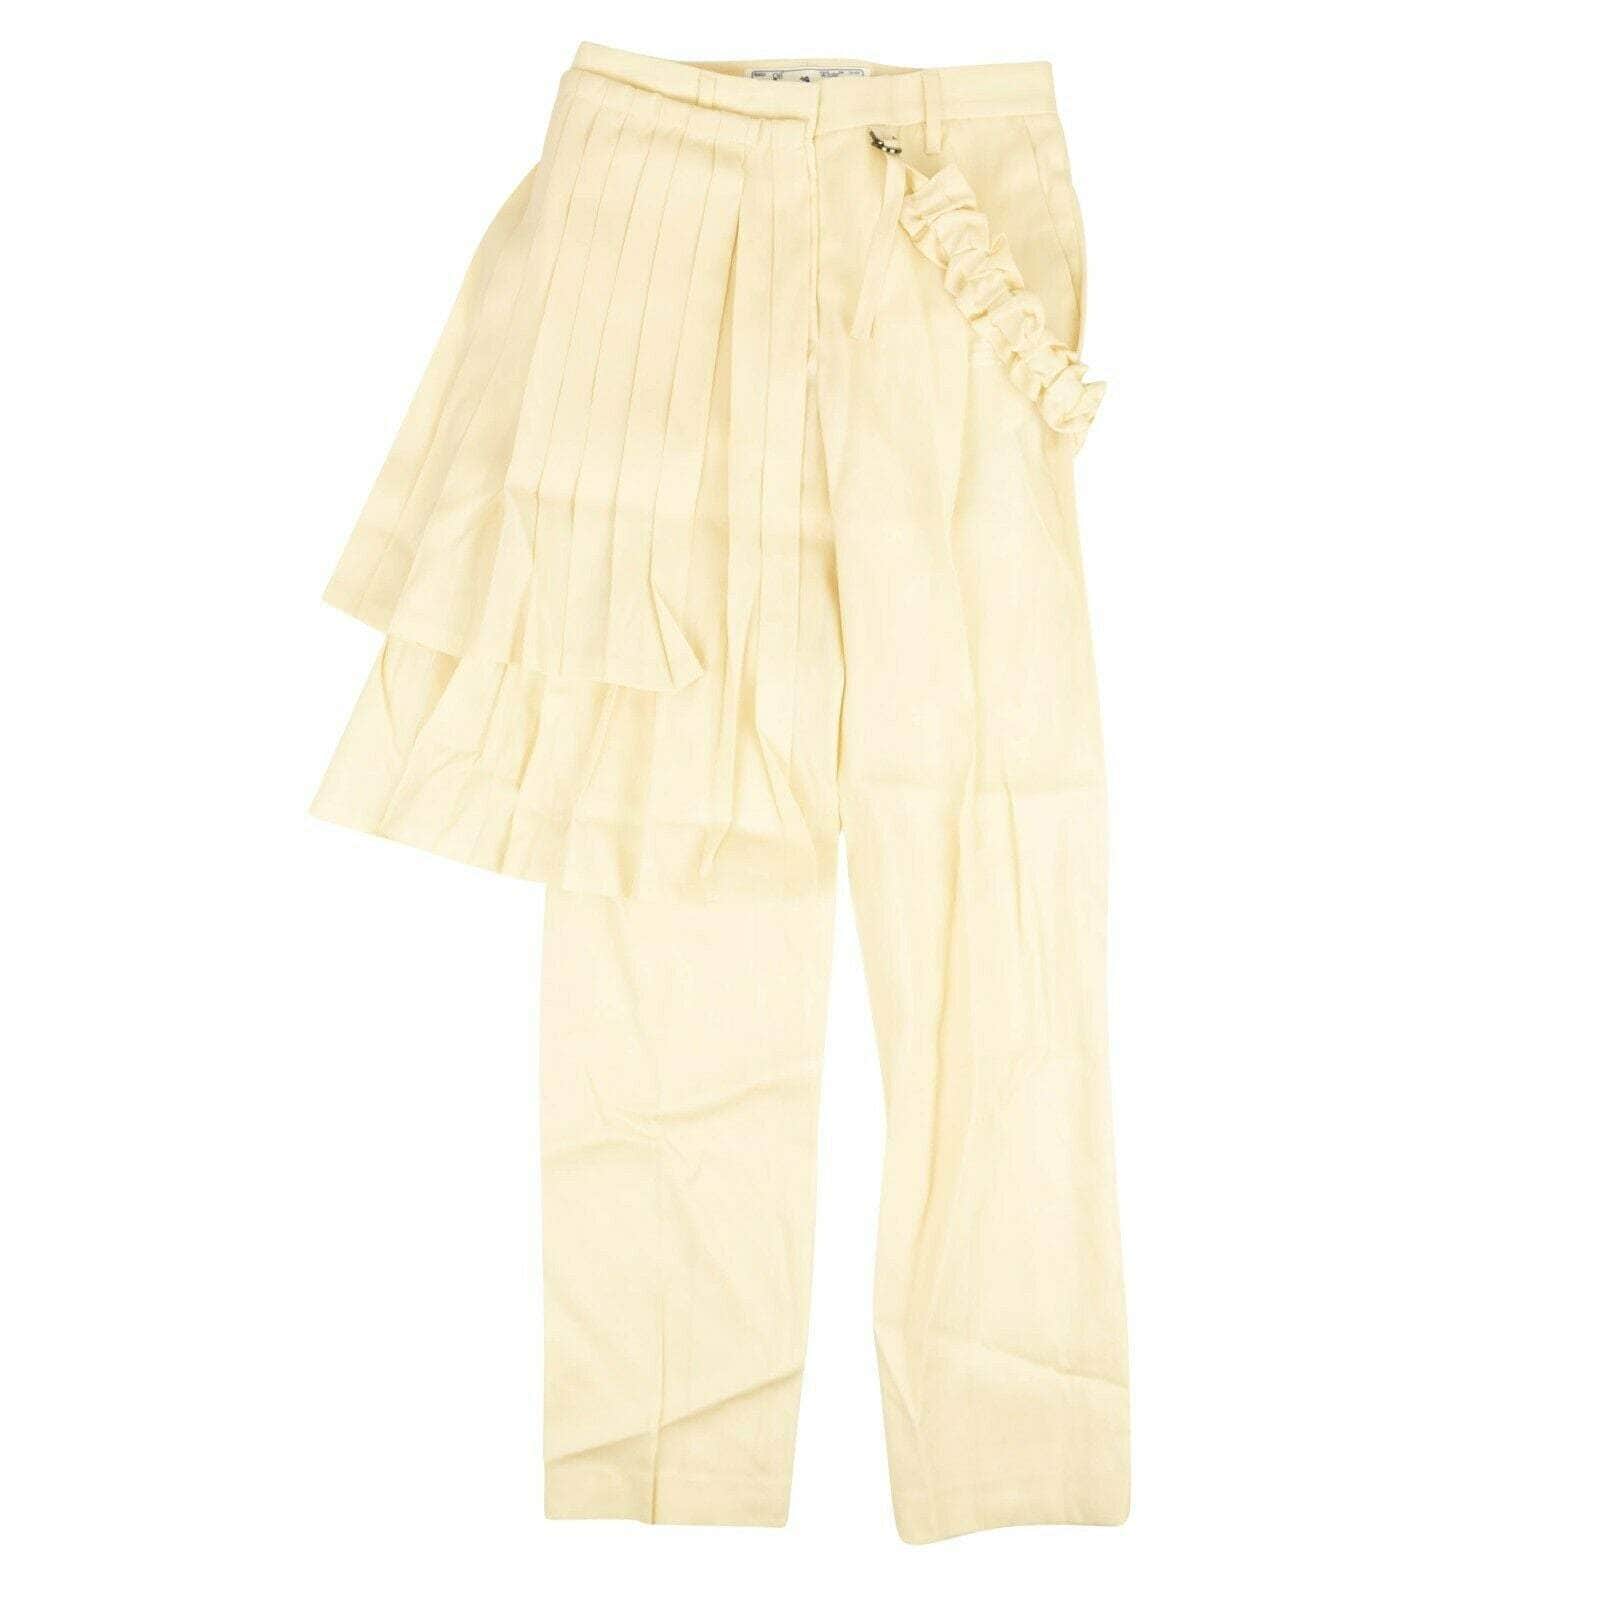 OFF-WHITE c/o VIRGIL ABLOH 750-1000, channelenable-all, chicmi, couponcollection, gender-womens, main-clothing, off-white, off-white-c-o-virgil-abloh, owjuly4, size-38, womens-pleated-pants 38 Beige Gabard Curtains Panel Pants 95-OFW-0020/38 95-OFW-0020/38